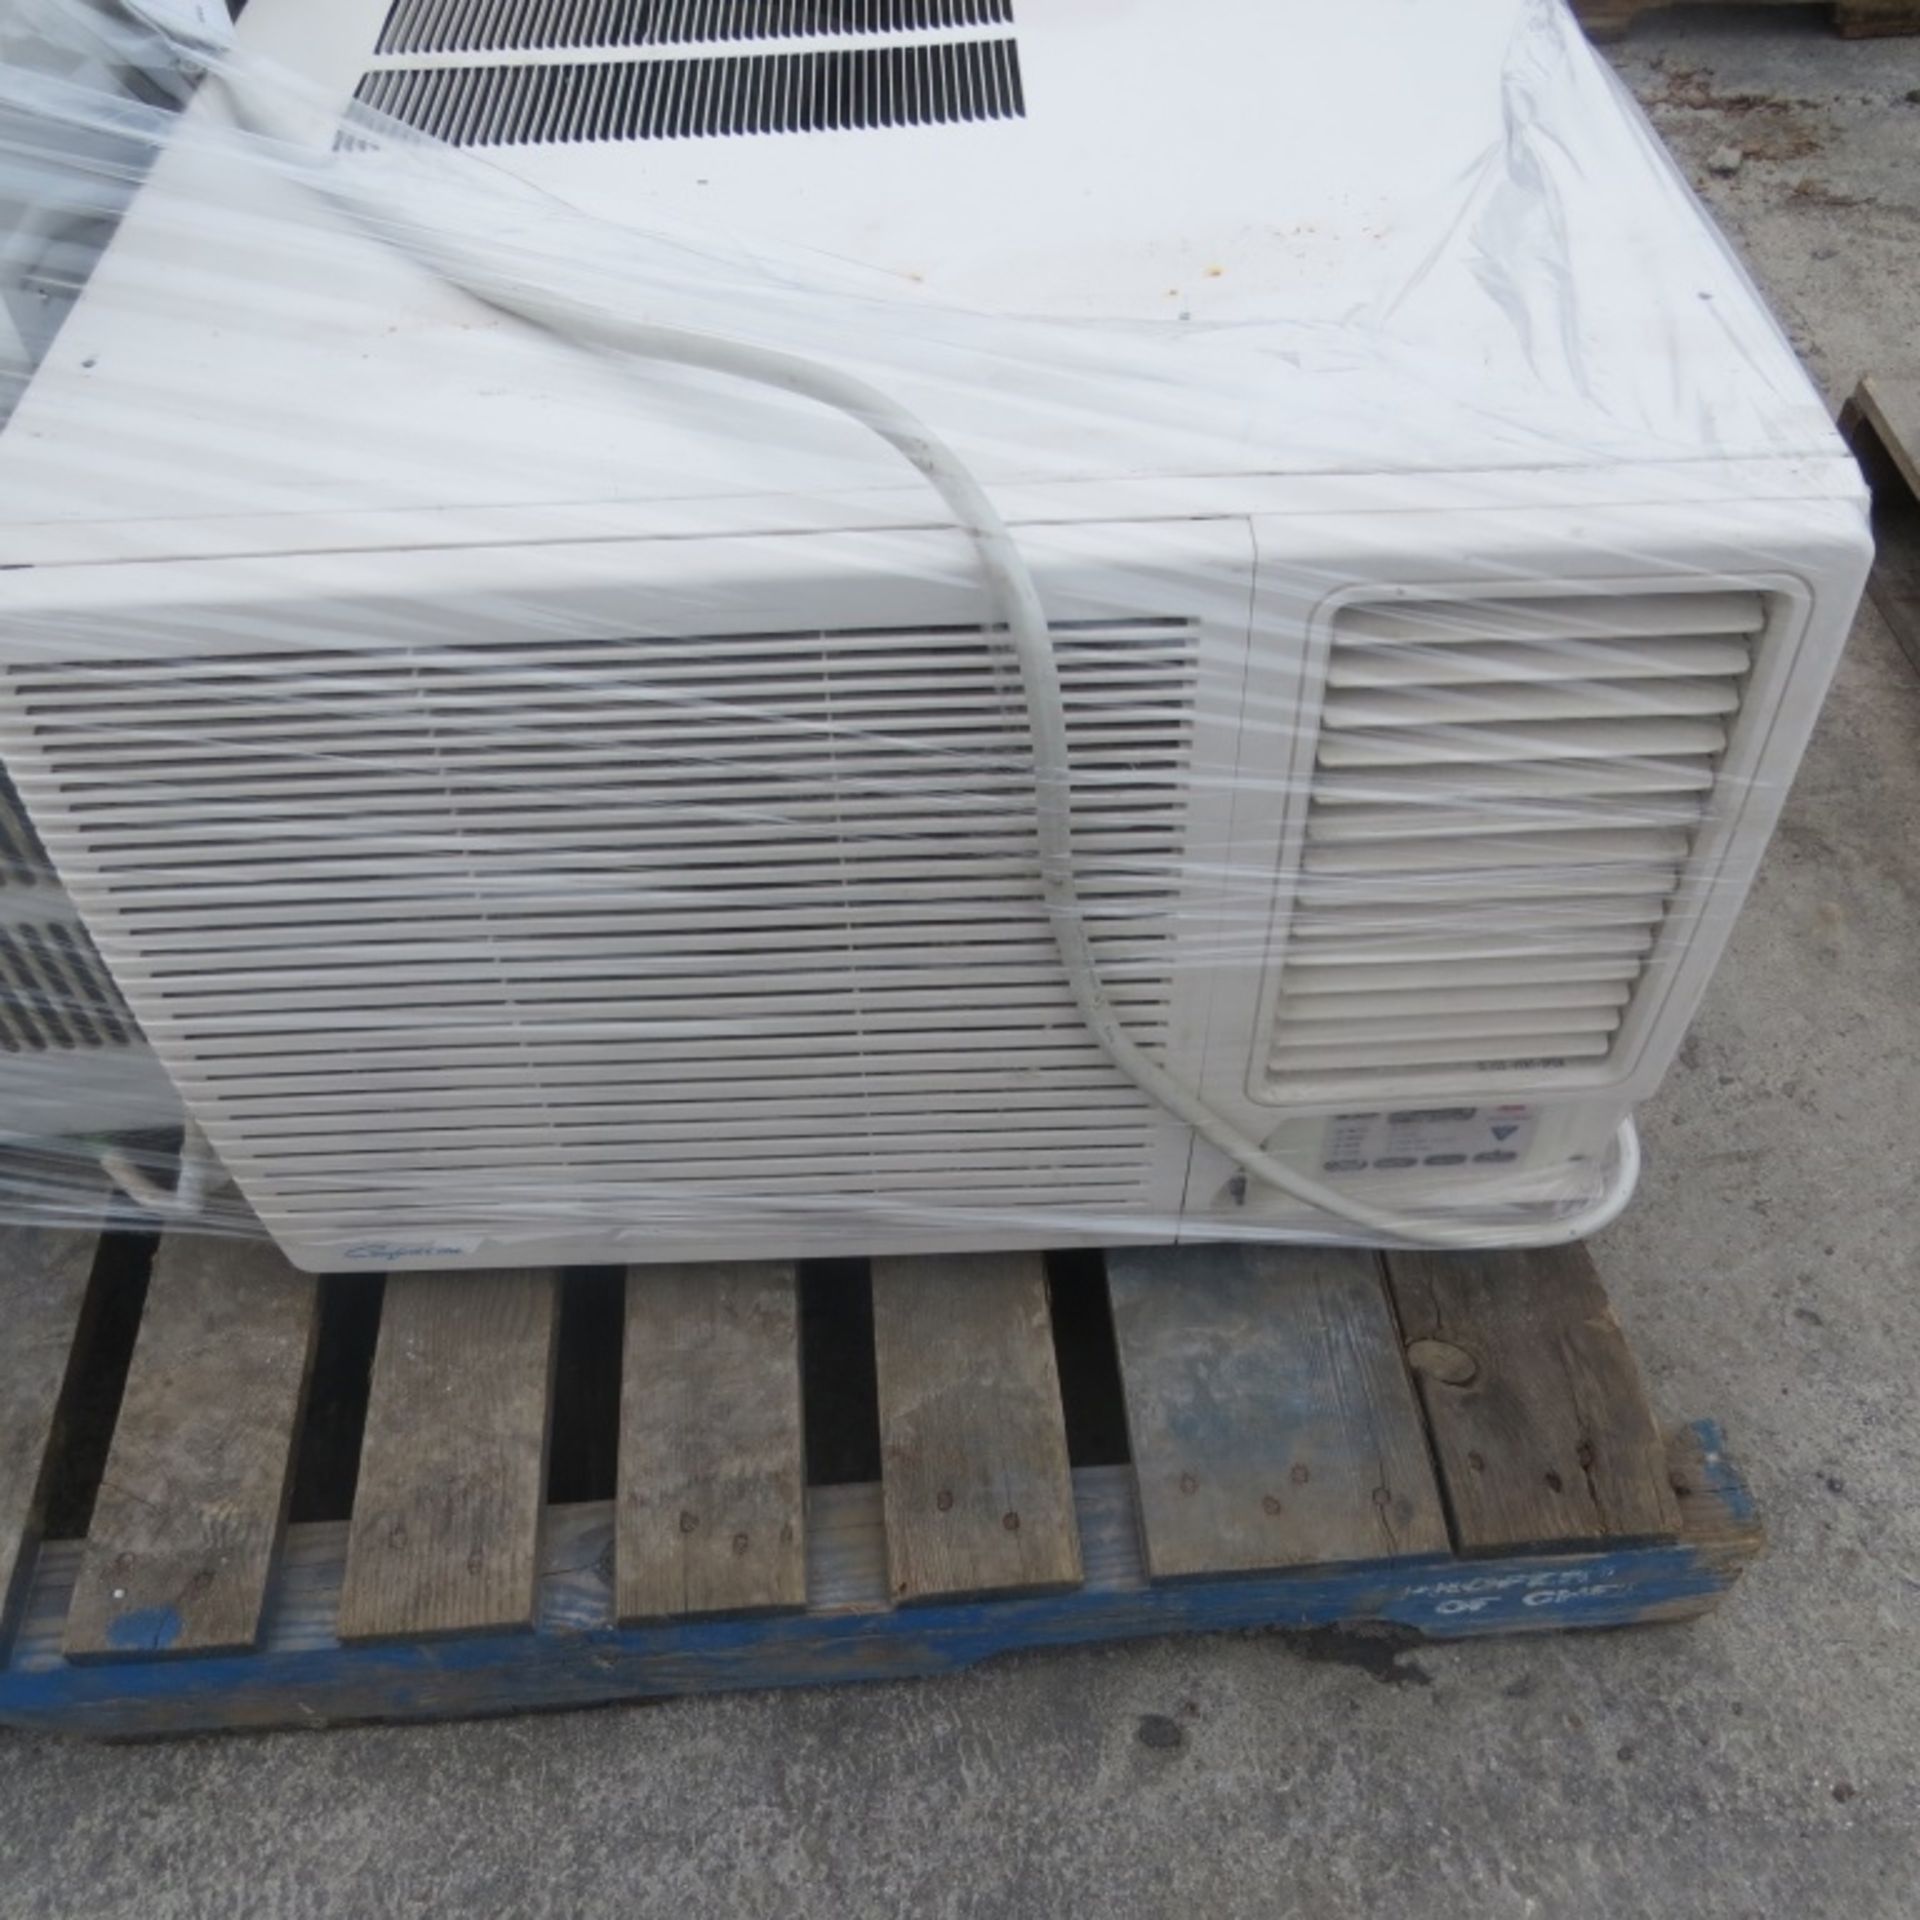 (qty-2)LG & ComfortAir Air Conditioning Window Units - Image 5 of 7